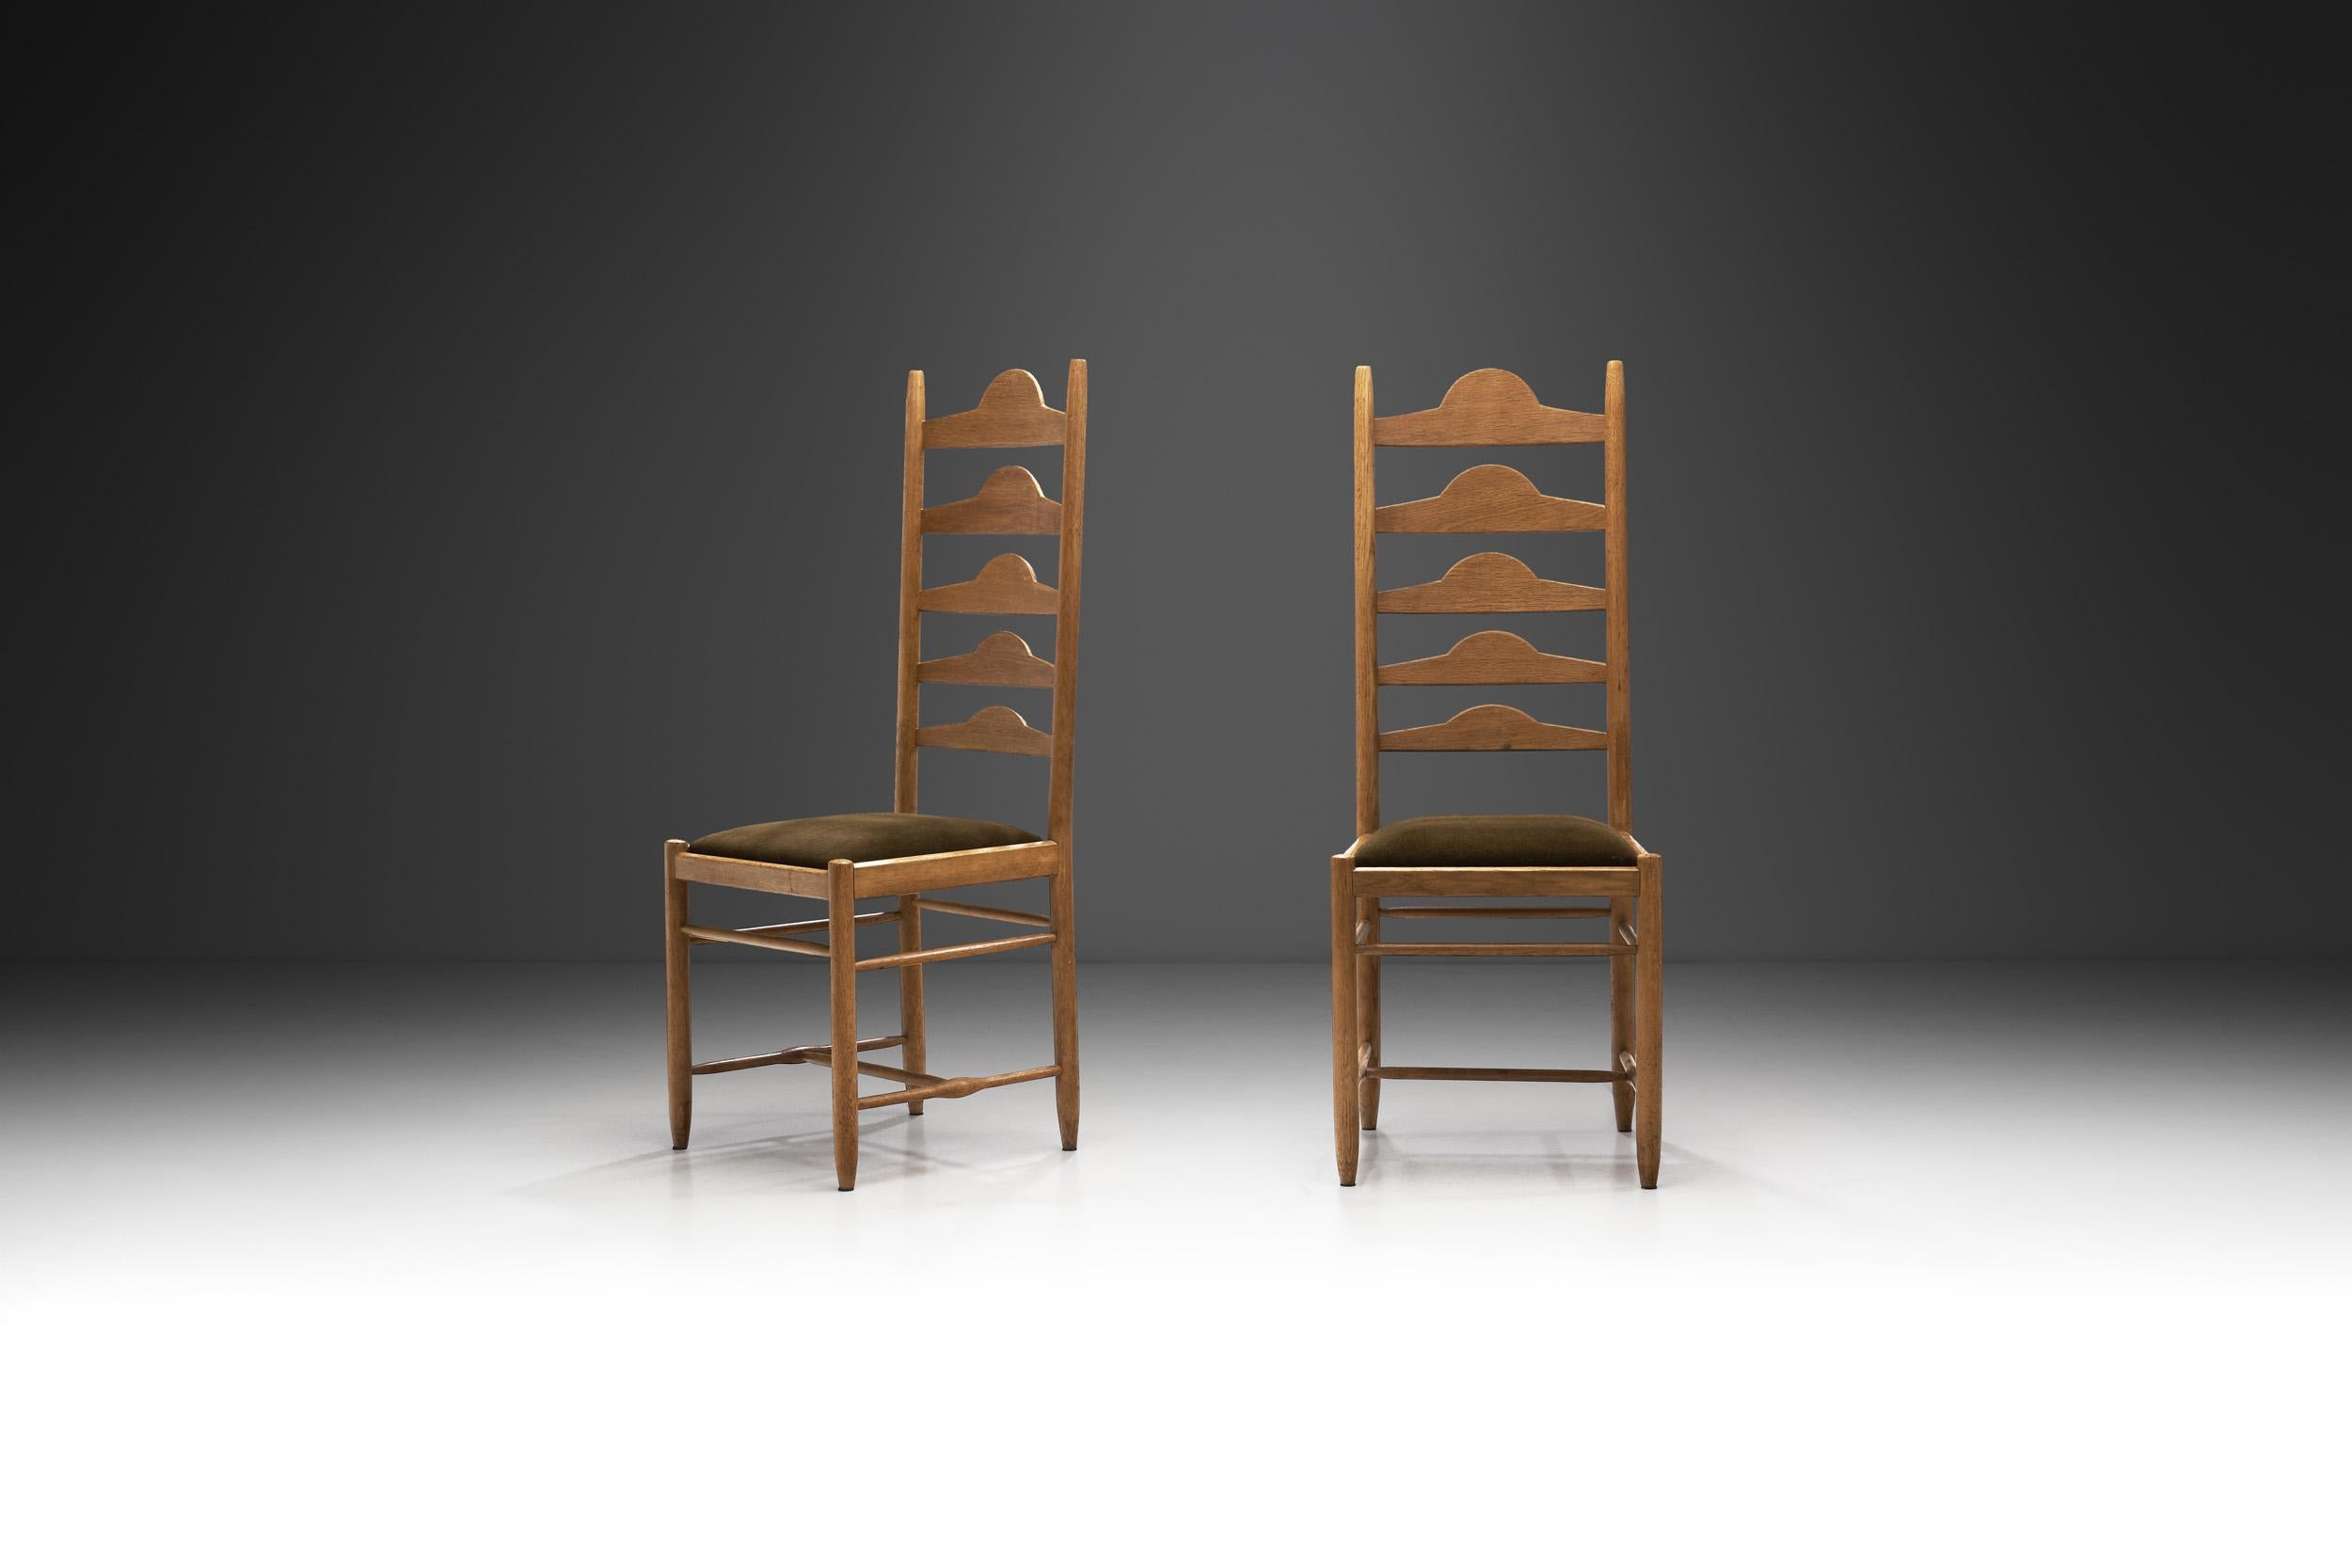 Over the 20th century, European designers fused traditional crafting techniques and styles with modern materials, design, and industry. The ladder-back chair was one of the most popular chairs of its time. Today, classic ladder-back chairs and their